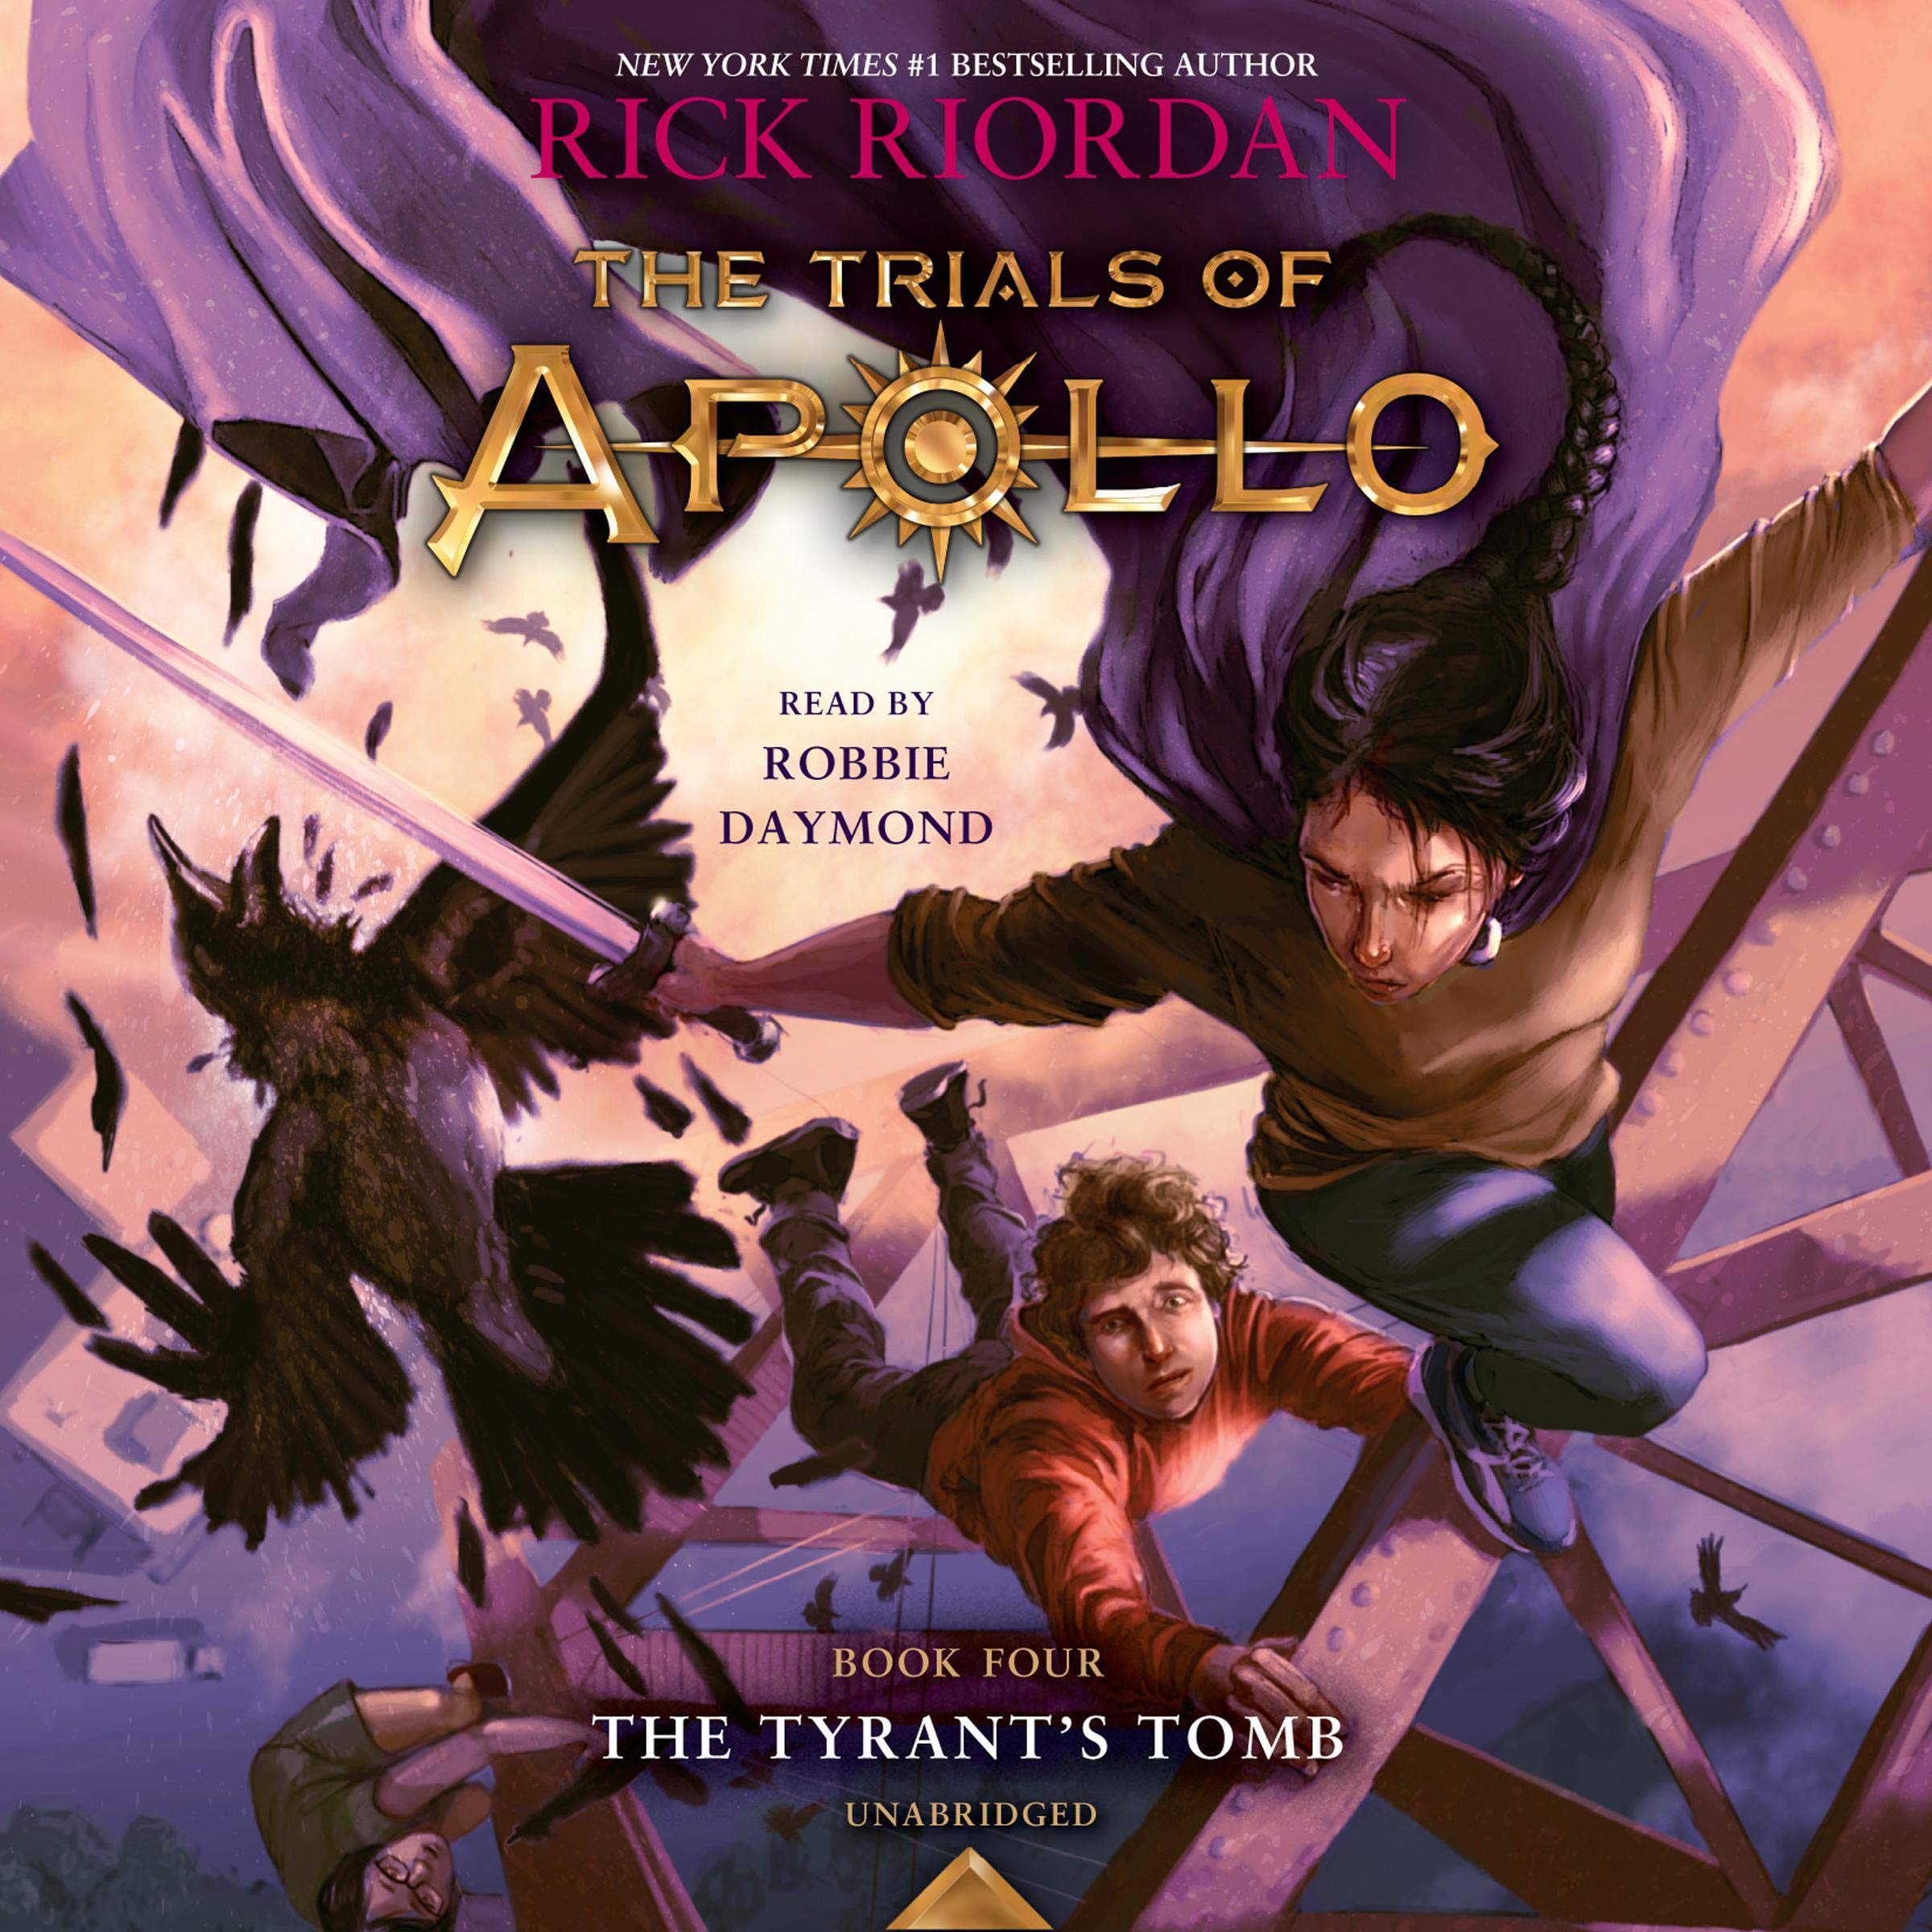 The Tyrant's Tomb: The Trials of Apollo Series, Book 4